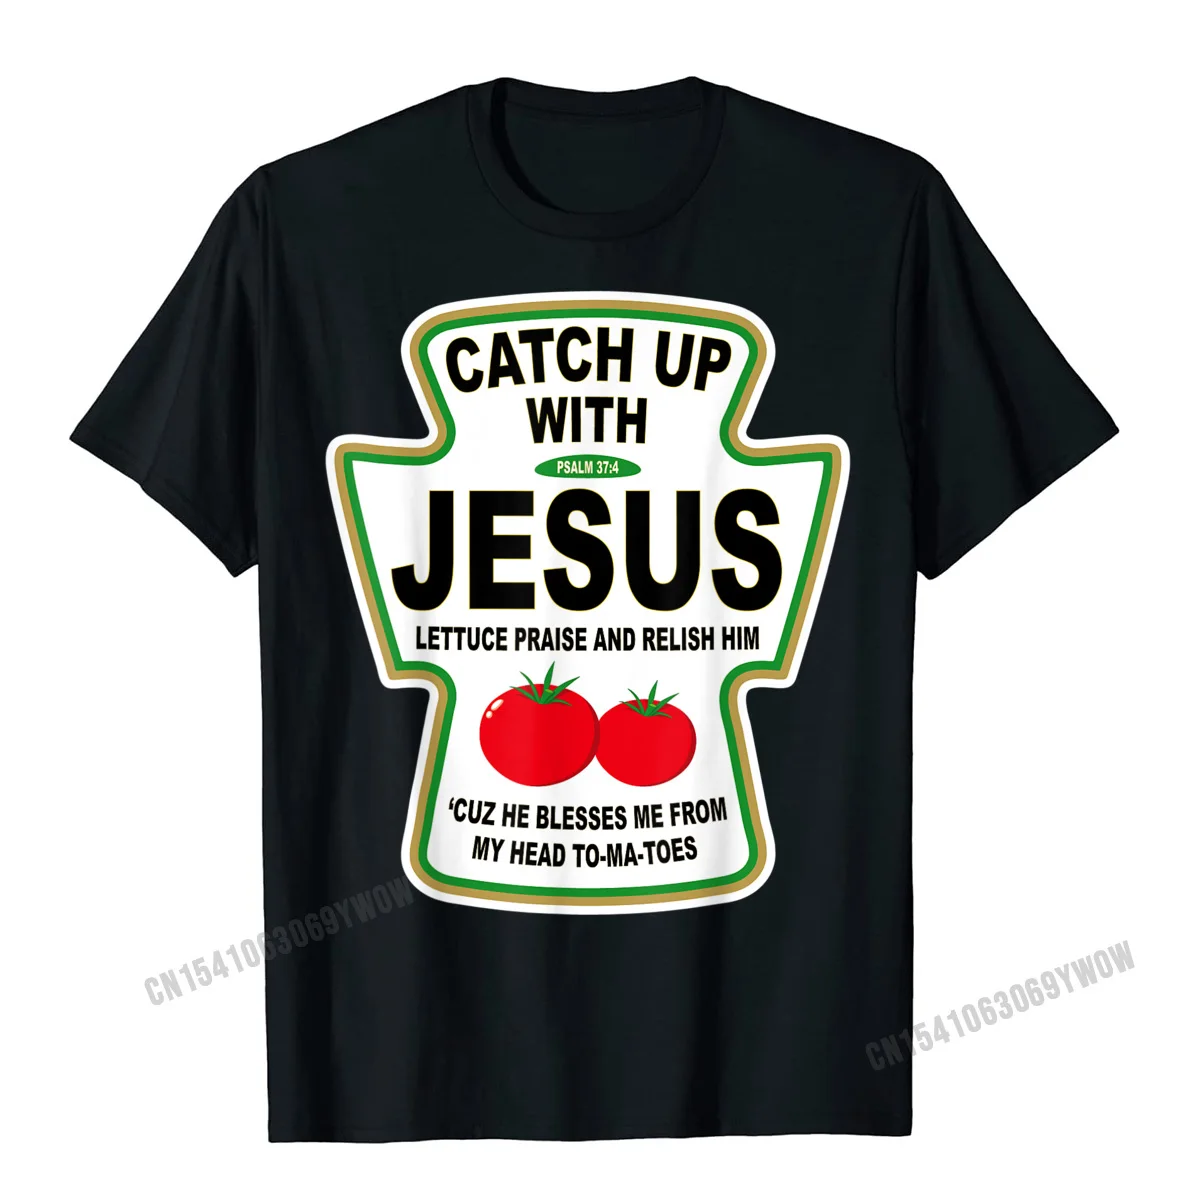 Christian Catch Up With Jesus Ketchup T-Shirt Family Student Tshirts Leisure Tops Tees Harajuku Cotton Casual